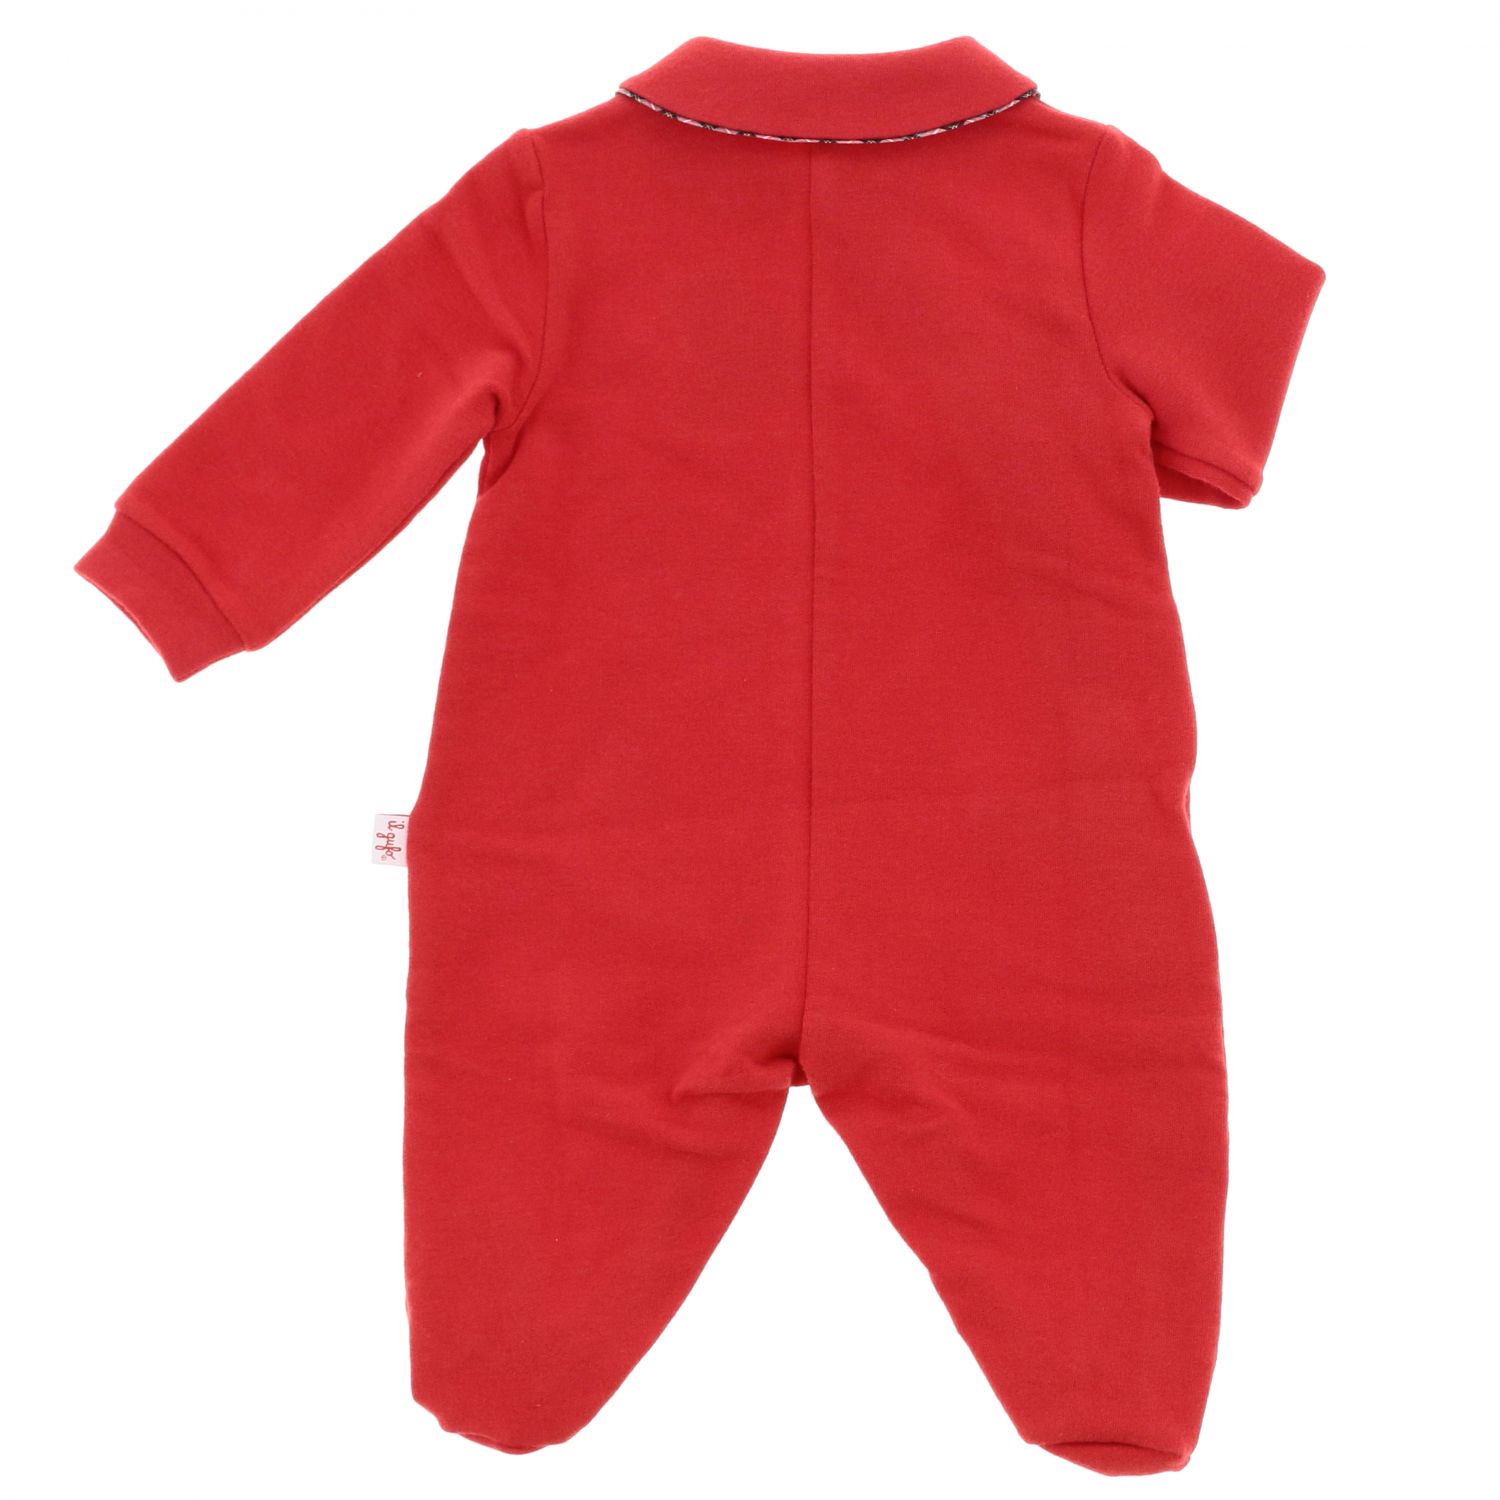 Il Gufo Outlet: pajamas for baby - Red | Il Gufo pajamas TP02N M0019 ...